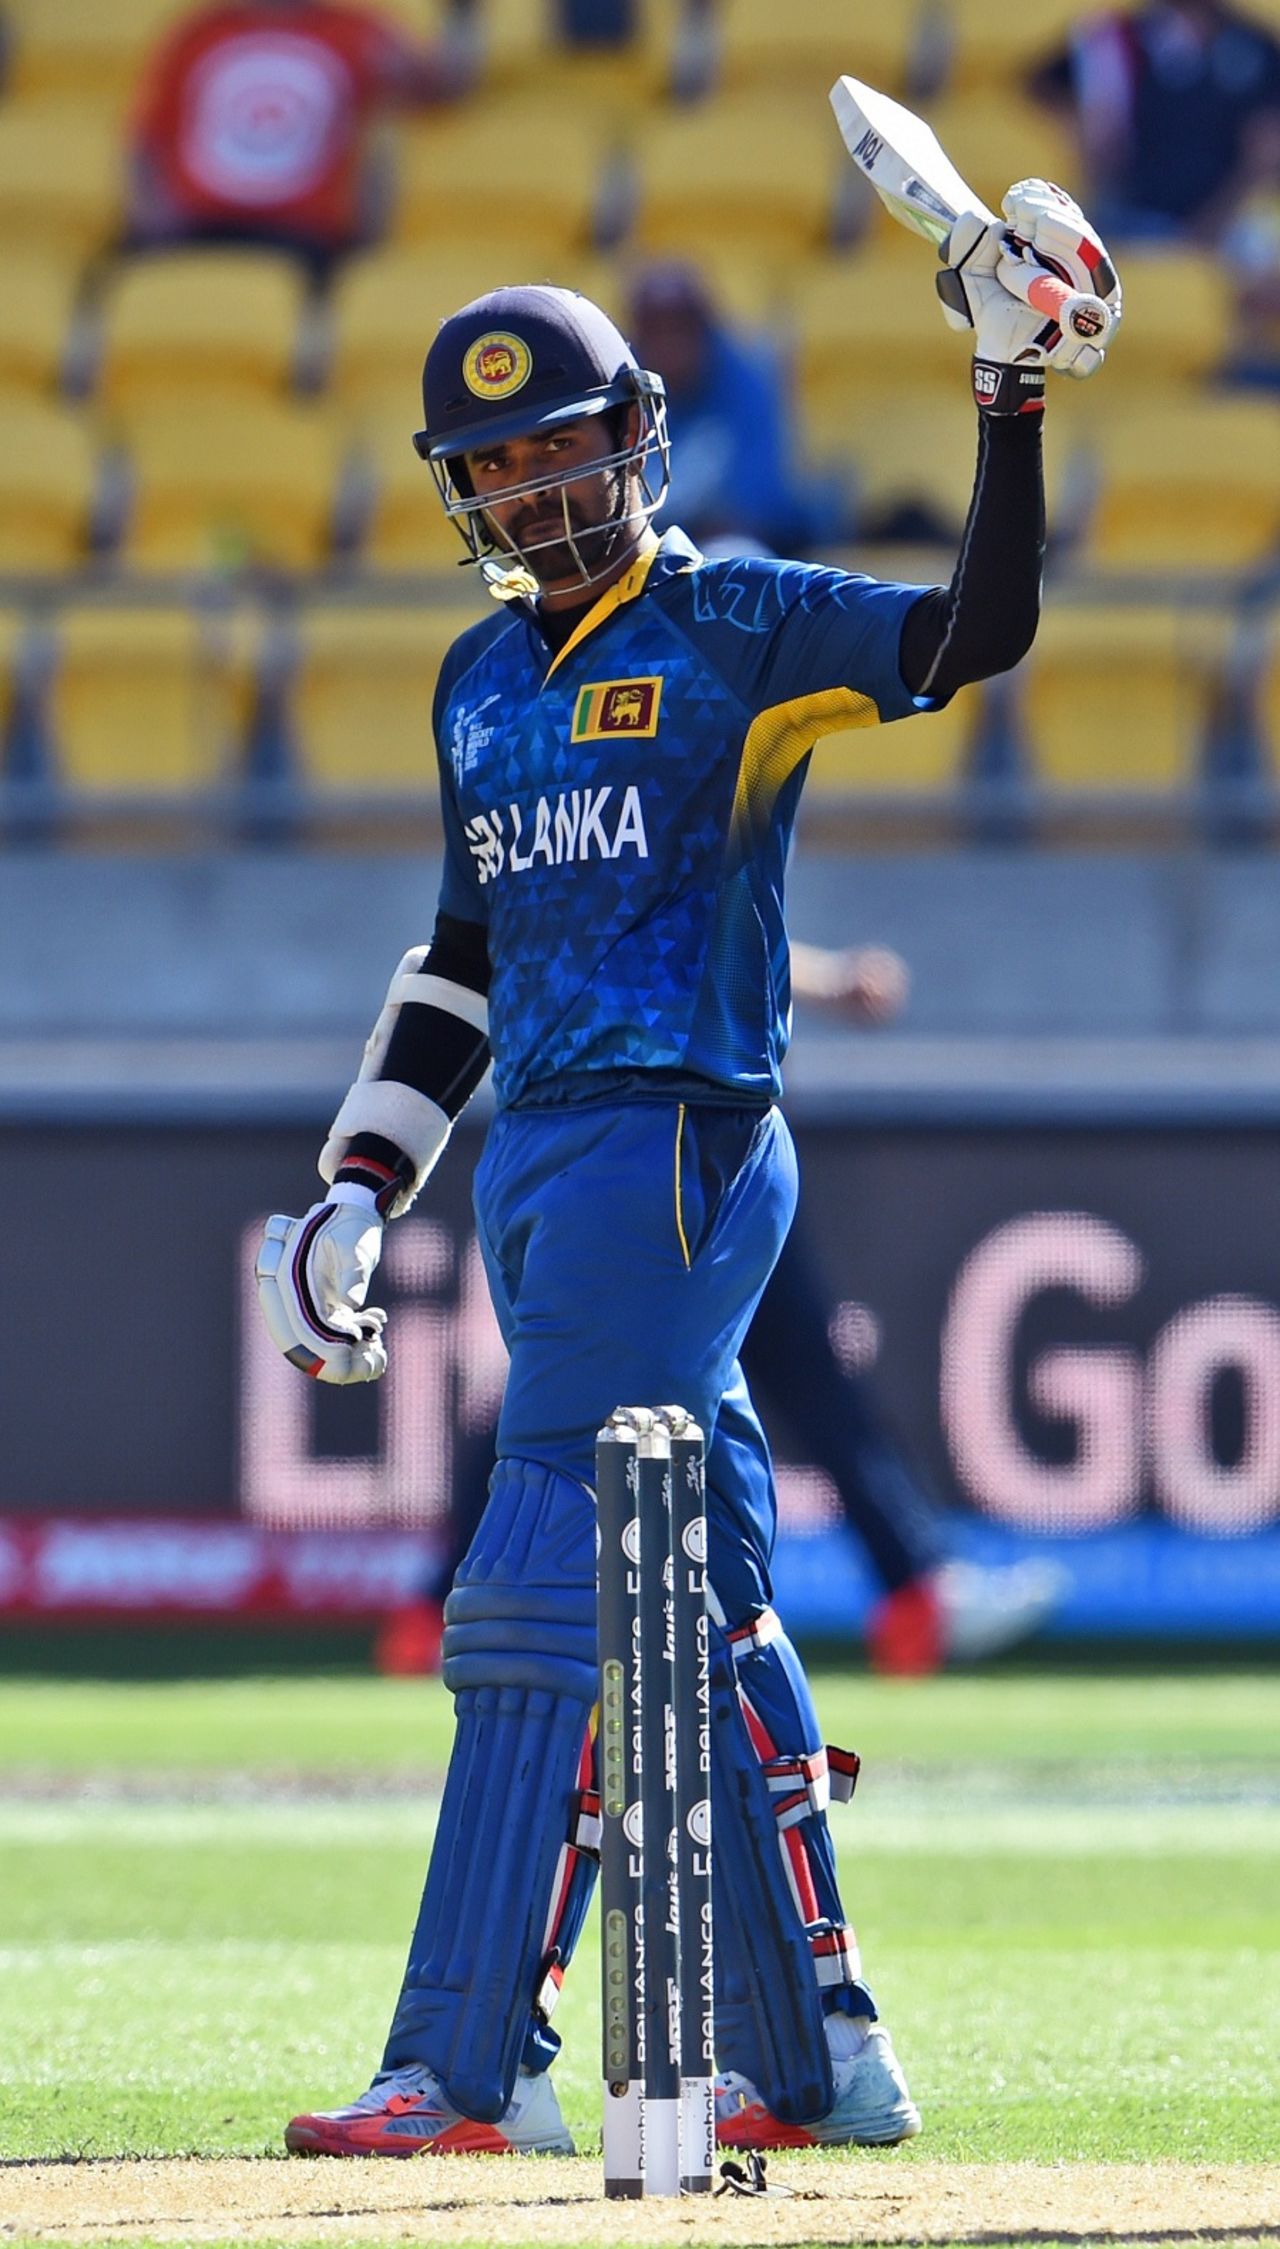 Lahiru Thirimanne raises his bat after bringing up a fifty, England v Sri Lanka, World Cup 2015, Group A, Wellington, March 1, 2015